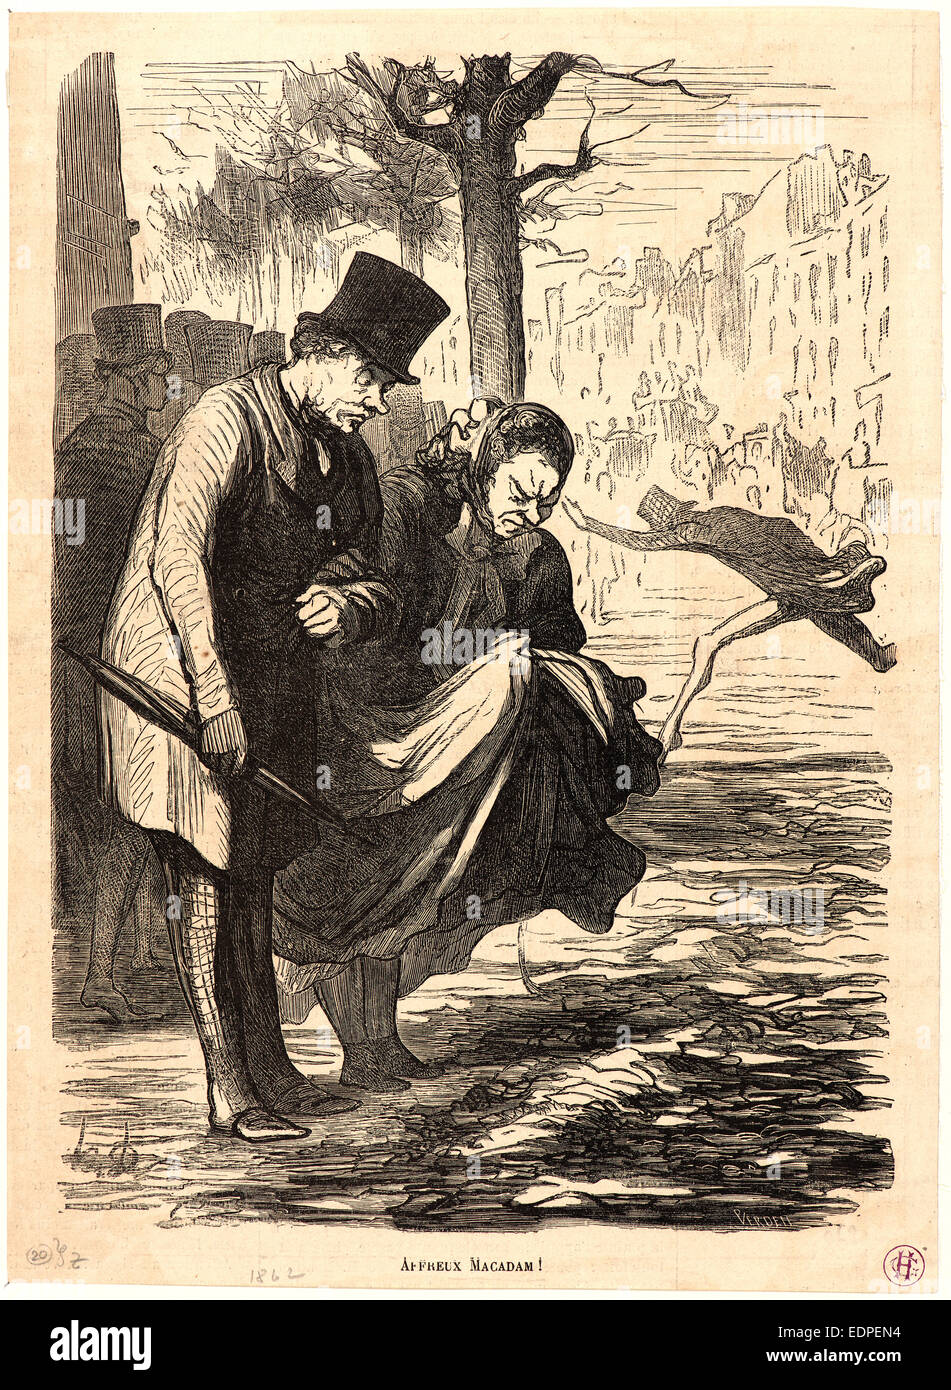 Honoré Daumier (French, 1808 - 1879). Affreux Macadam!, 1862. Wood engraving Stock Photo